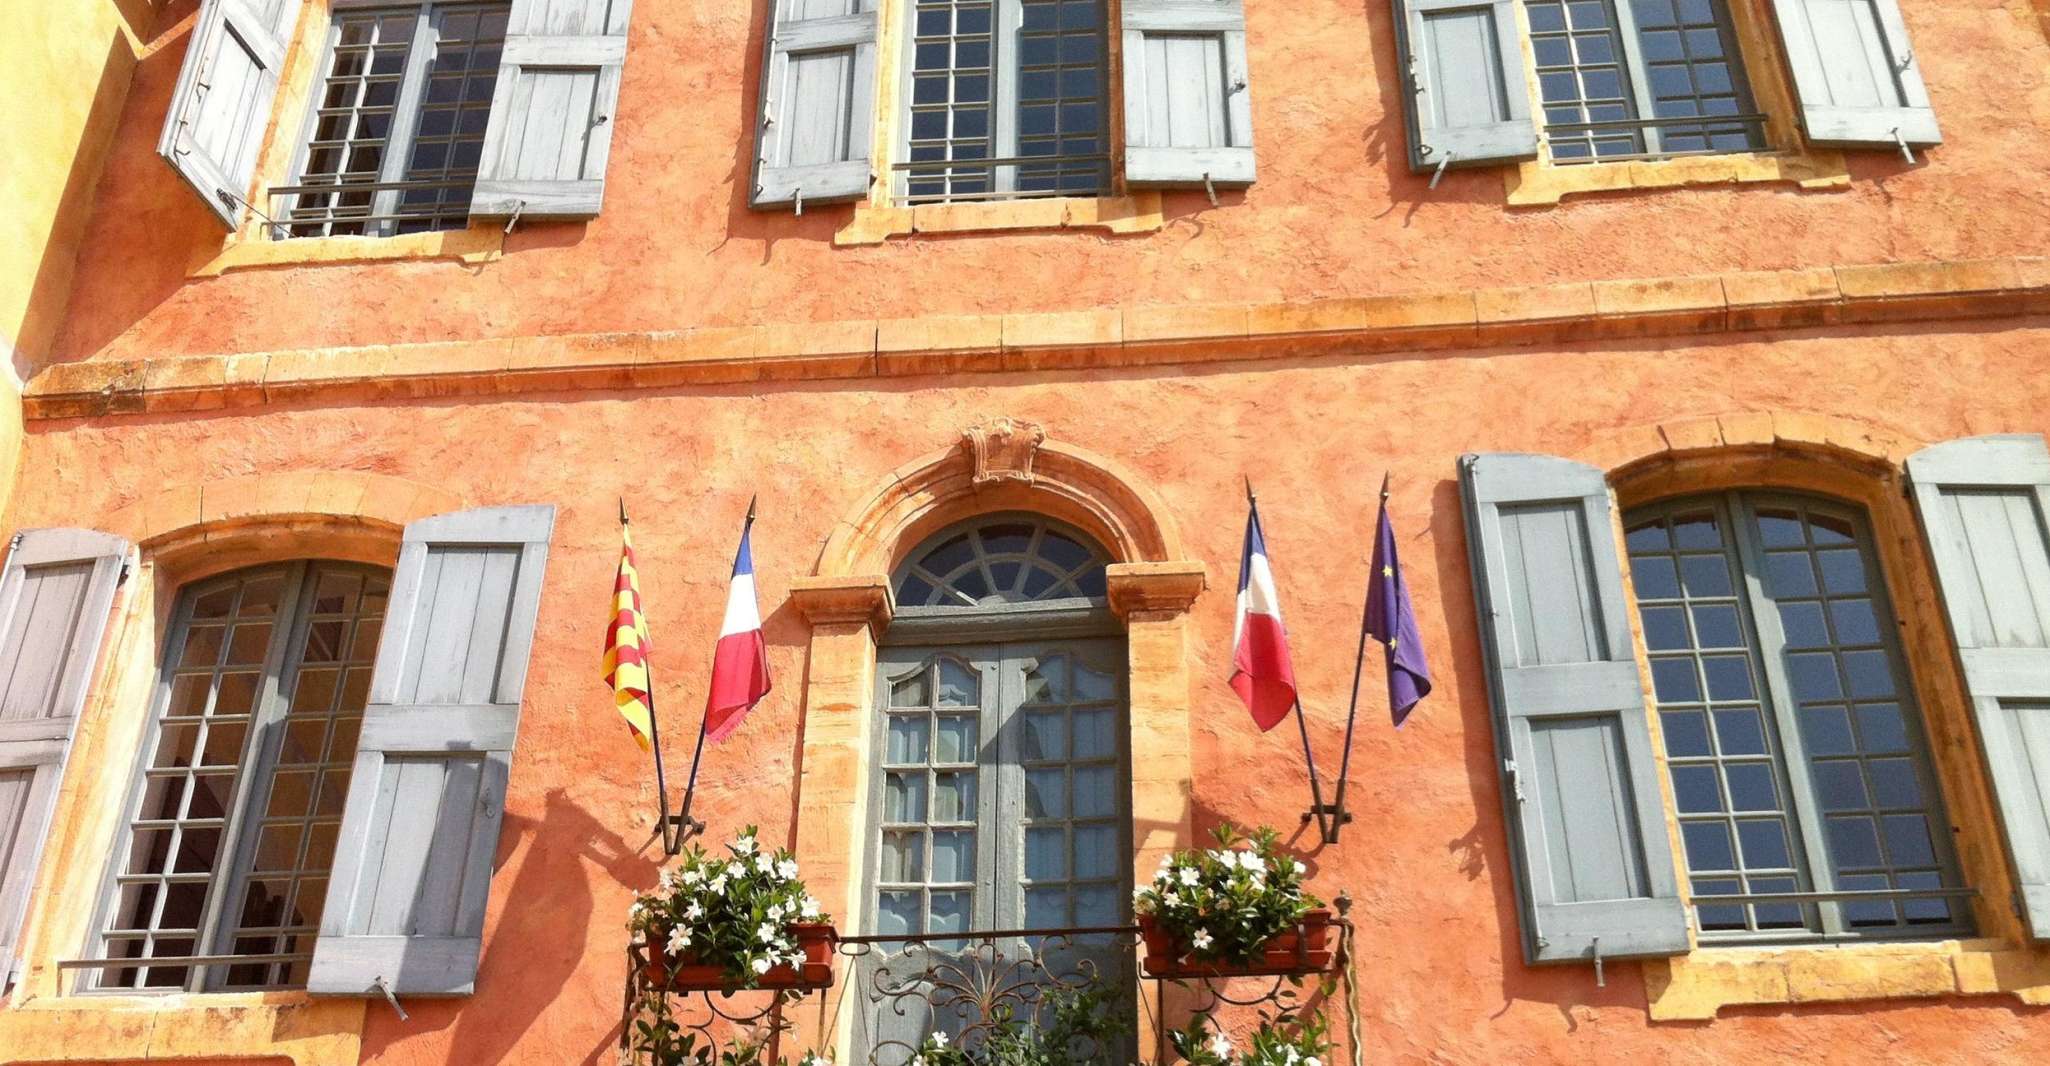 NEW Luberon villages Full-day tour from Aix-en-Provence - Housity